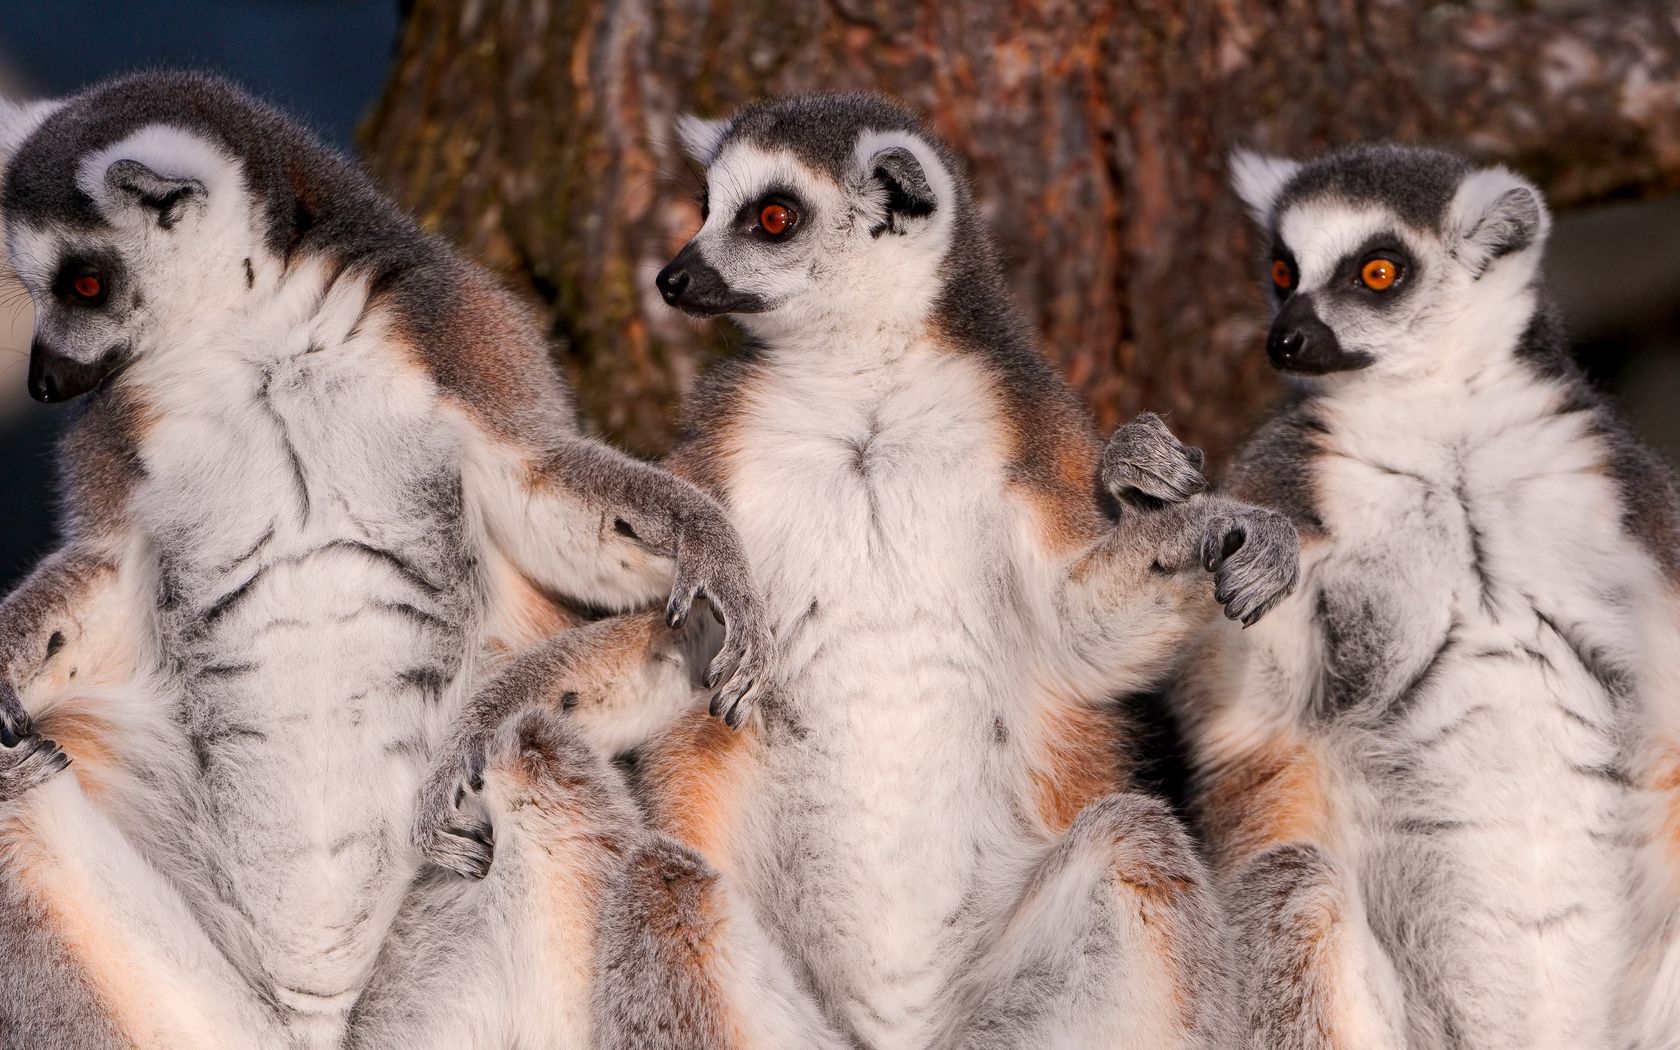 animals, lemurs, animal, family, wool cell phone wallpapers